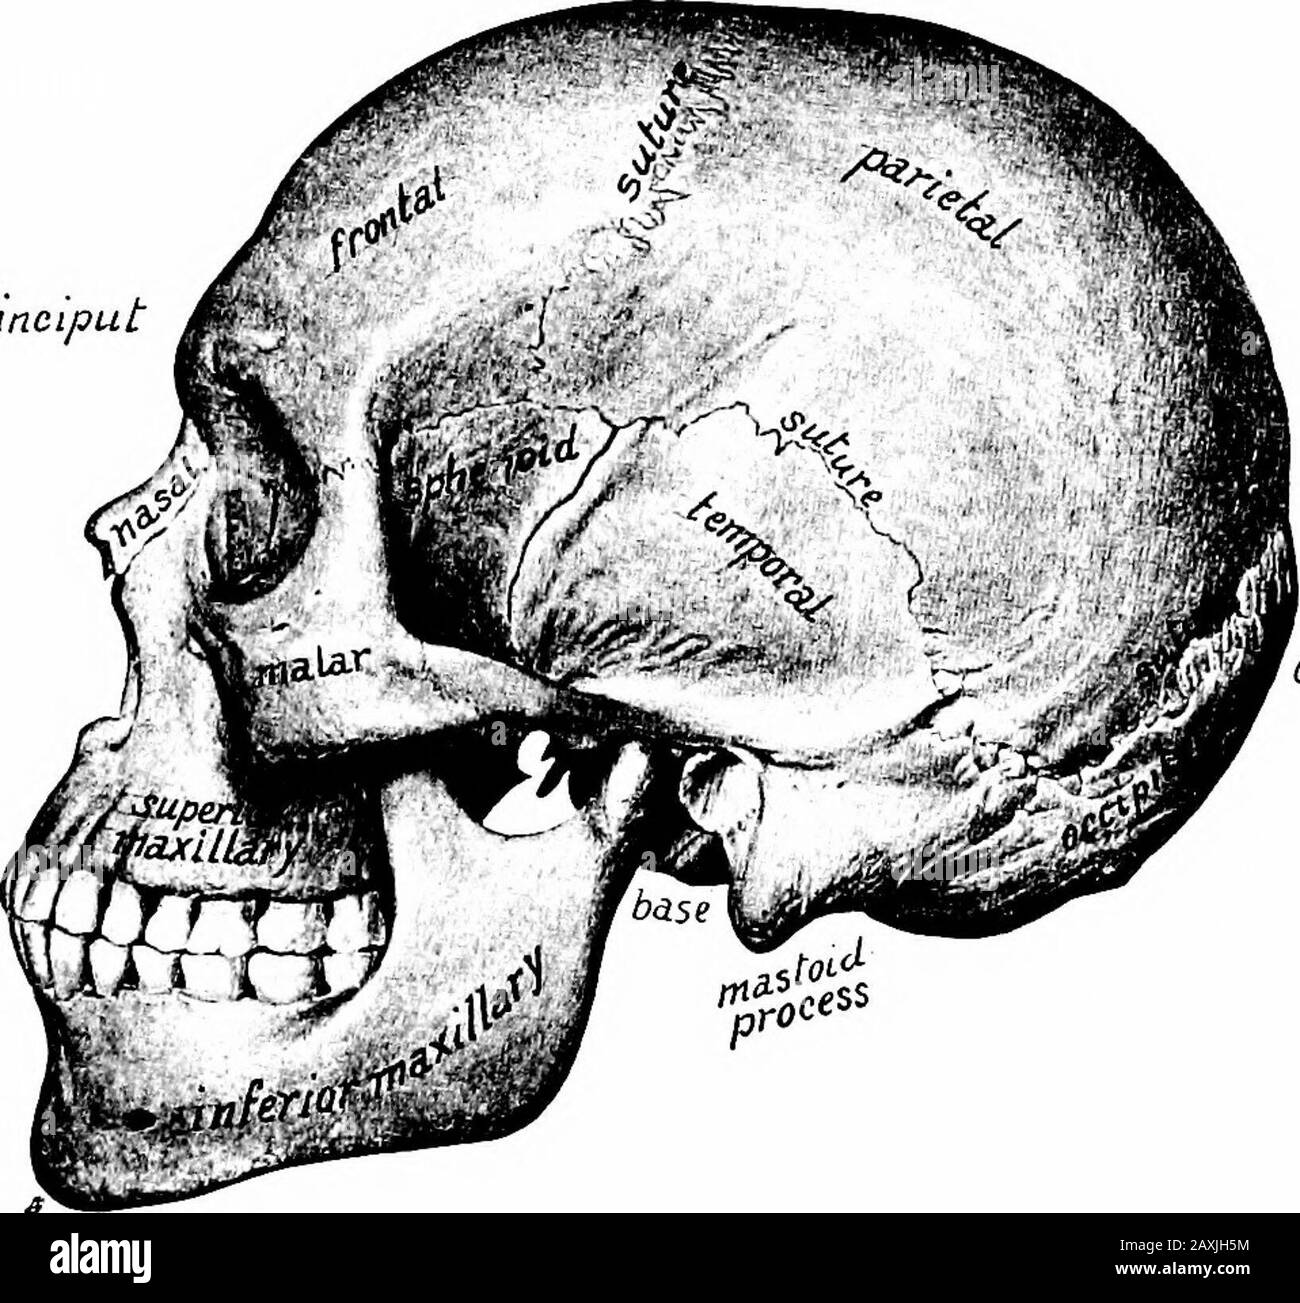 A manual of anatomy . med by the squamousportion of the occipital bone and the lower part of each parietal bone.Its lower limit is the superior curved line and in the middle of this isthe external occipital protuberance, or inion. The vertex {norma verticaUs) is the superior aspect of the skull 70 OSTEOLOGY and varies greatly. The sutures are quite pronounced. In themidline is the sagittal suture between the parietal bones. This joinsthe lamboidal suture, between the occipital and parietal bones, be-hind. This junction indicates the posterior fontanelle of the fetus.In front, the sagittal sutu Stock Photo